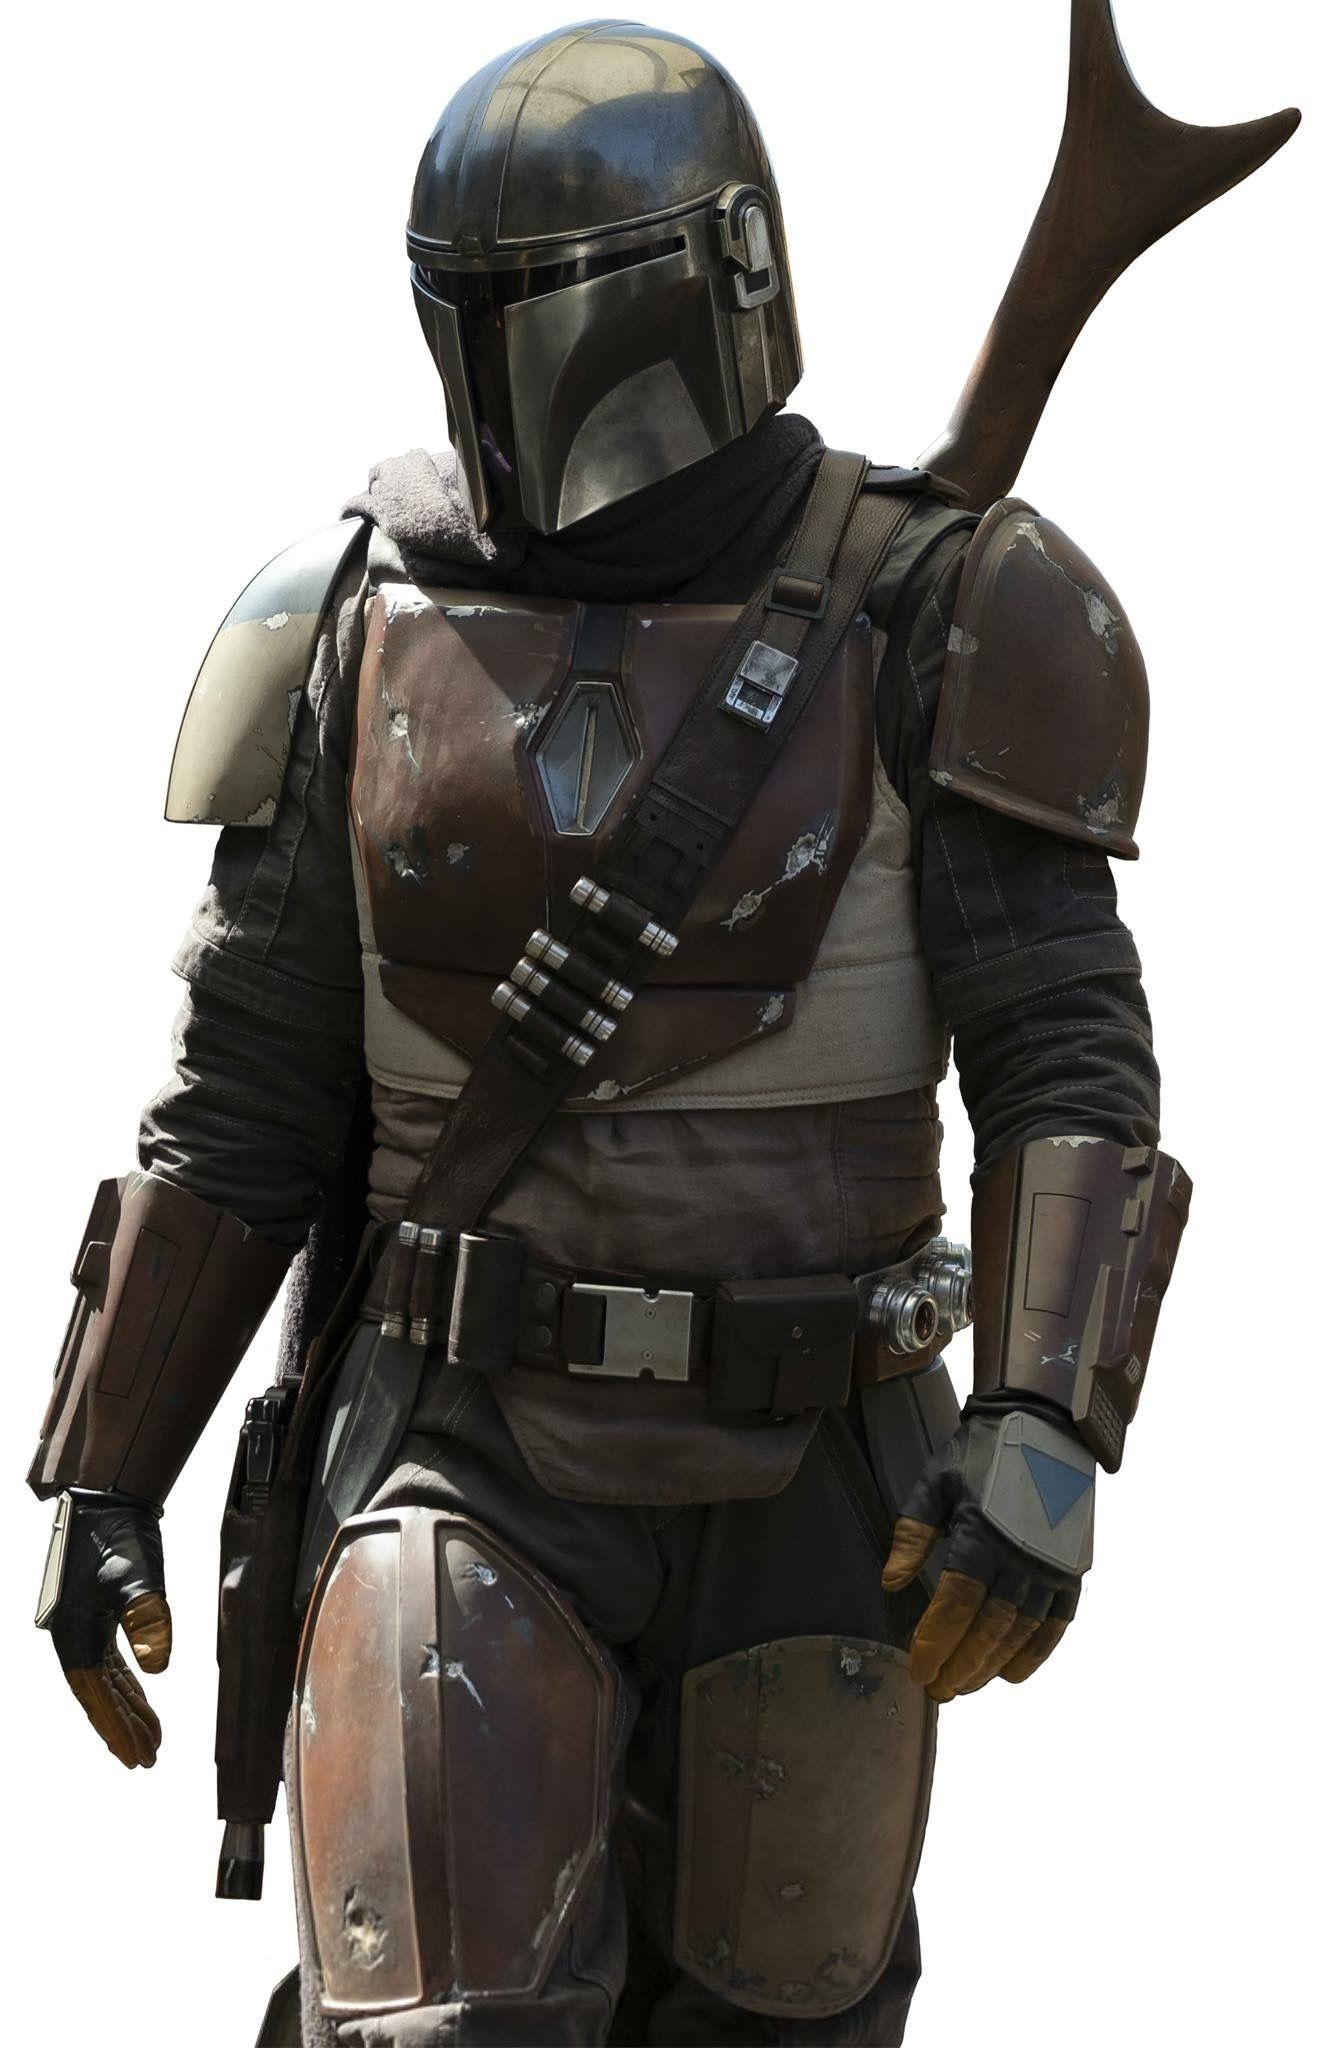 The Mandalorian. Background removed for easy reference